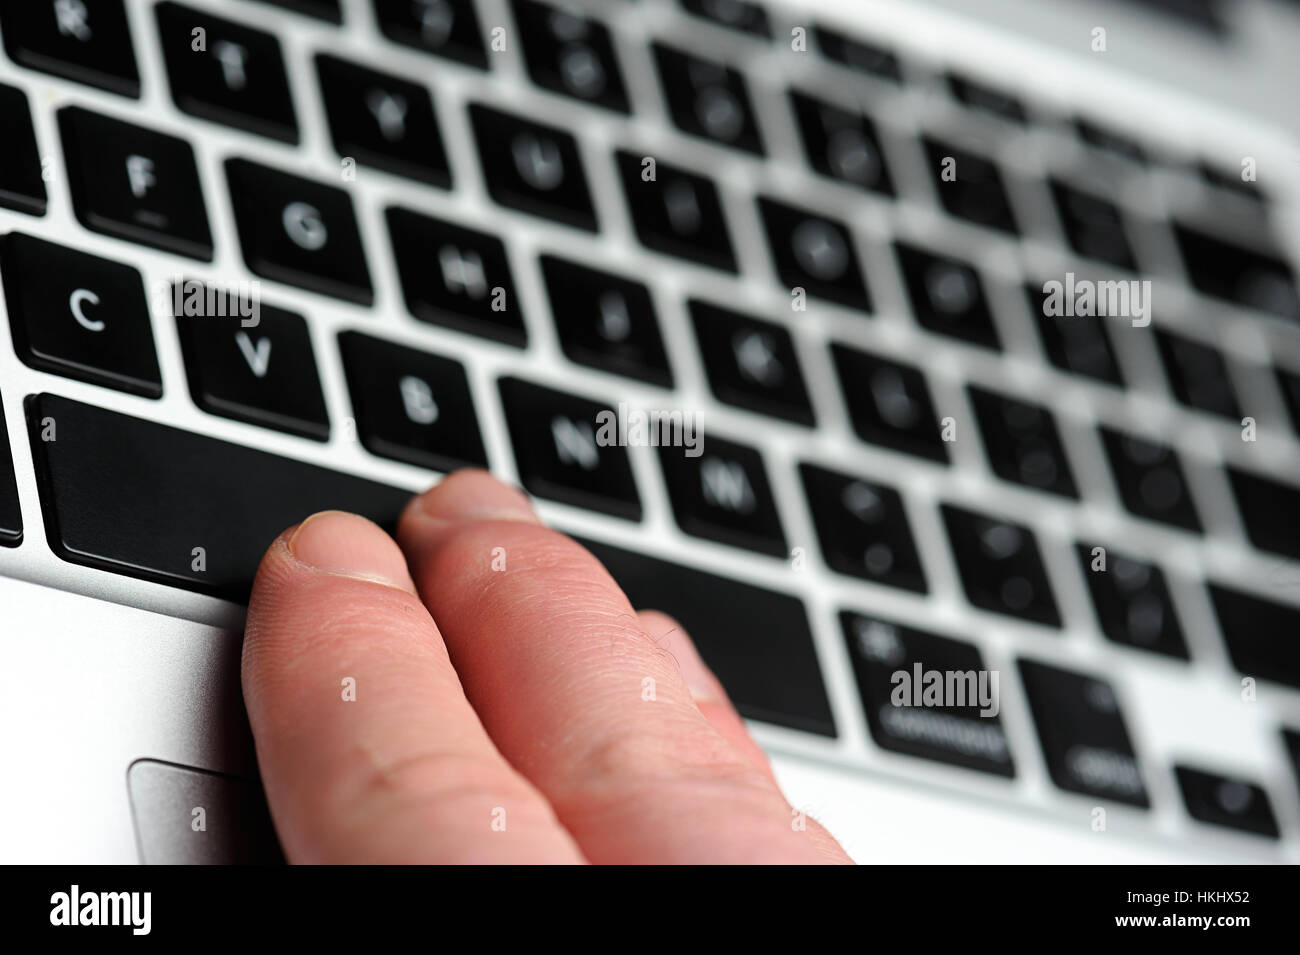 press space button on laptop close up Stock Photo